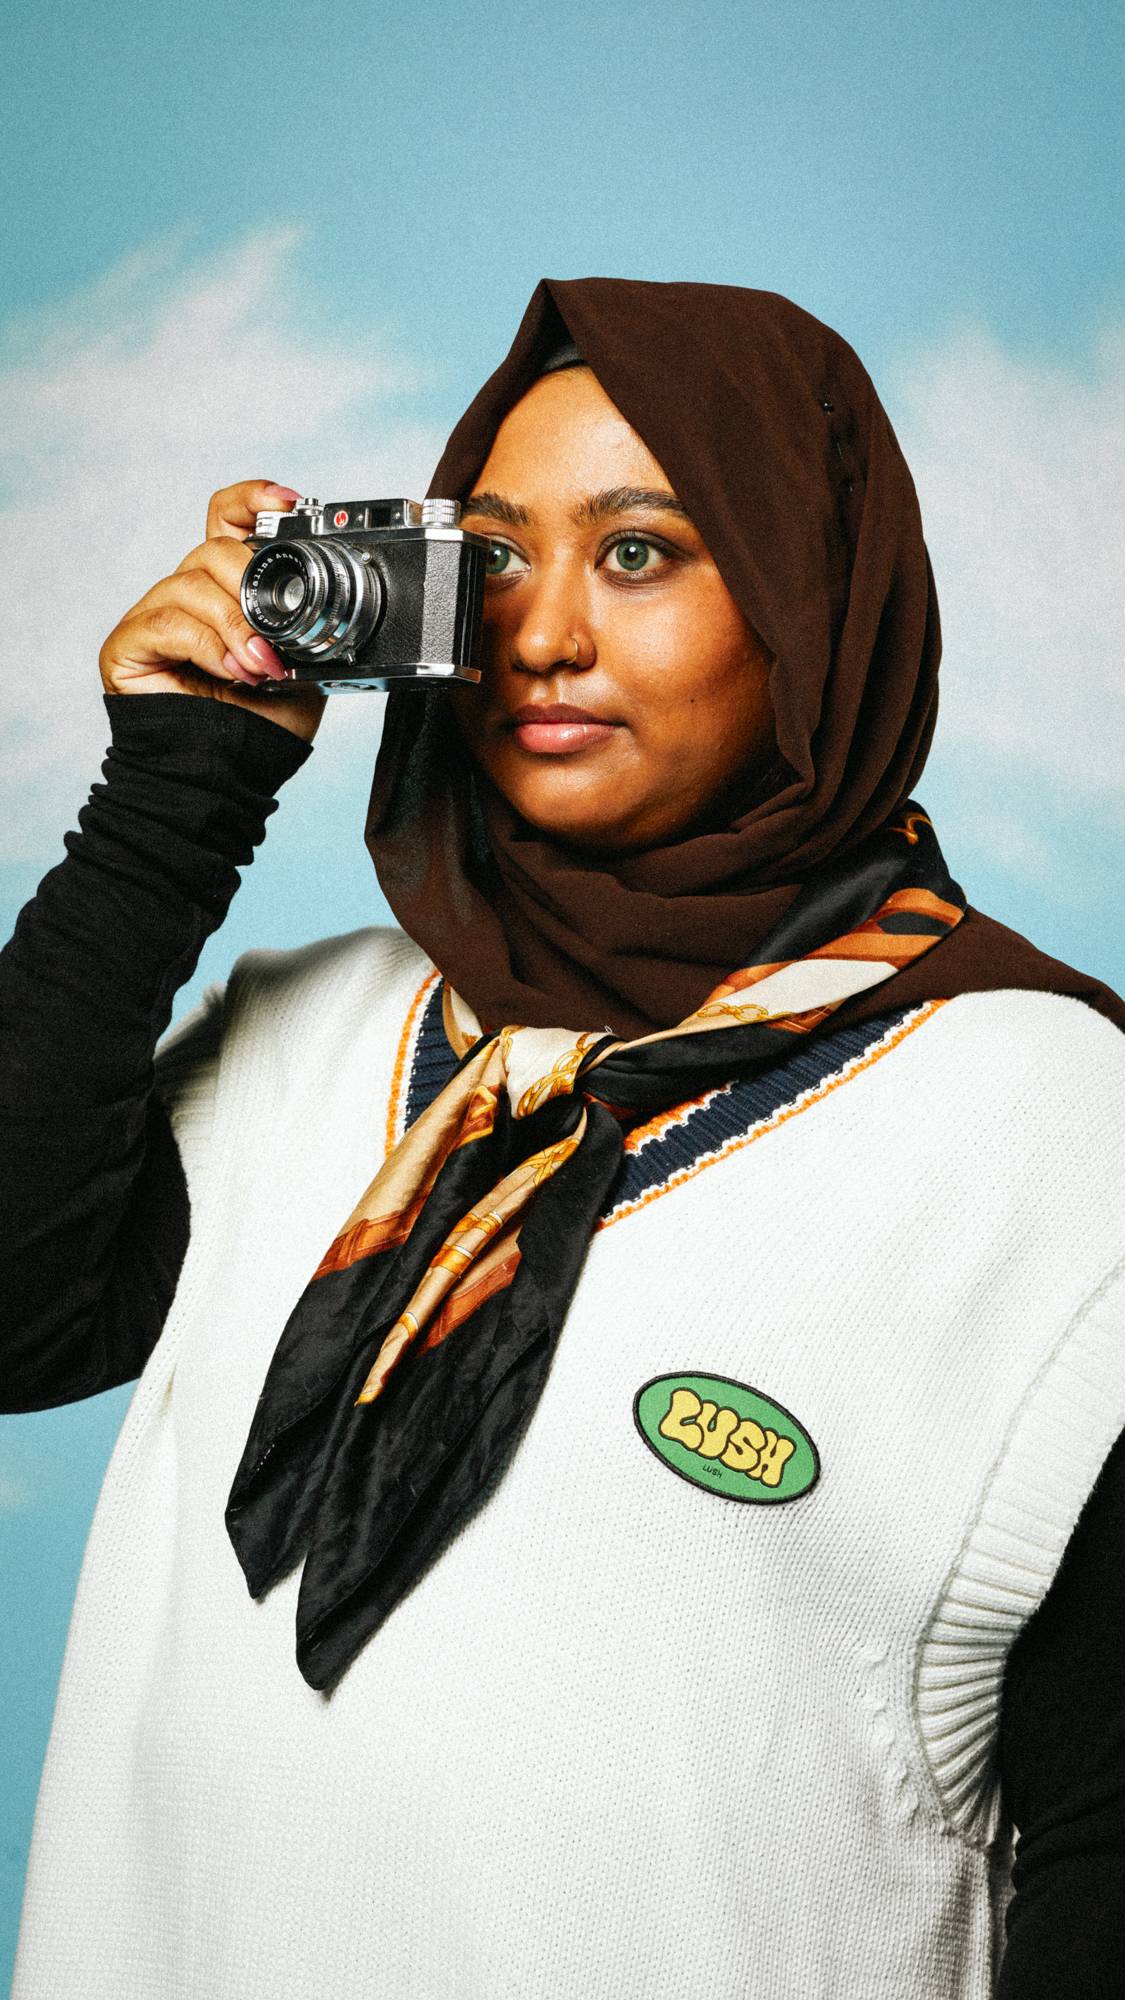 Model is wearing a hijab and white, knitted jumper with the Retro Bubble iron-on patch while they hold a camera for a photo. 